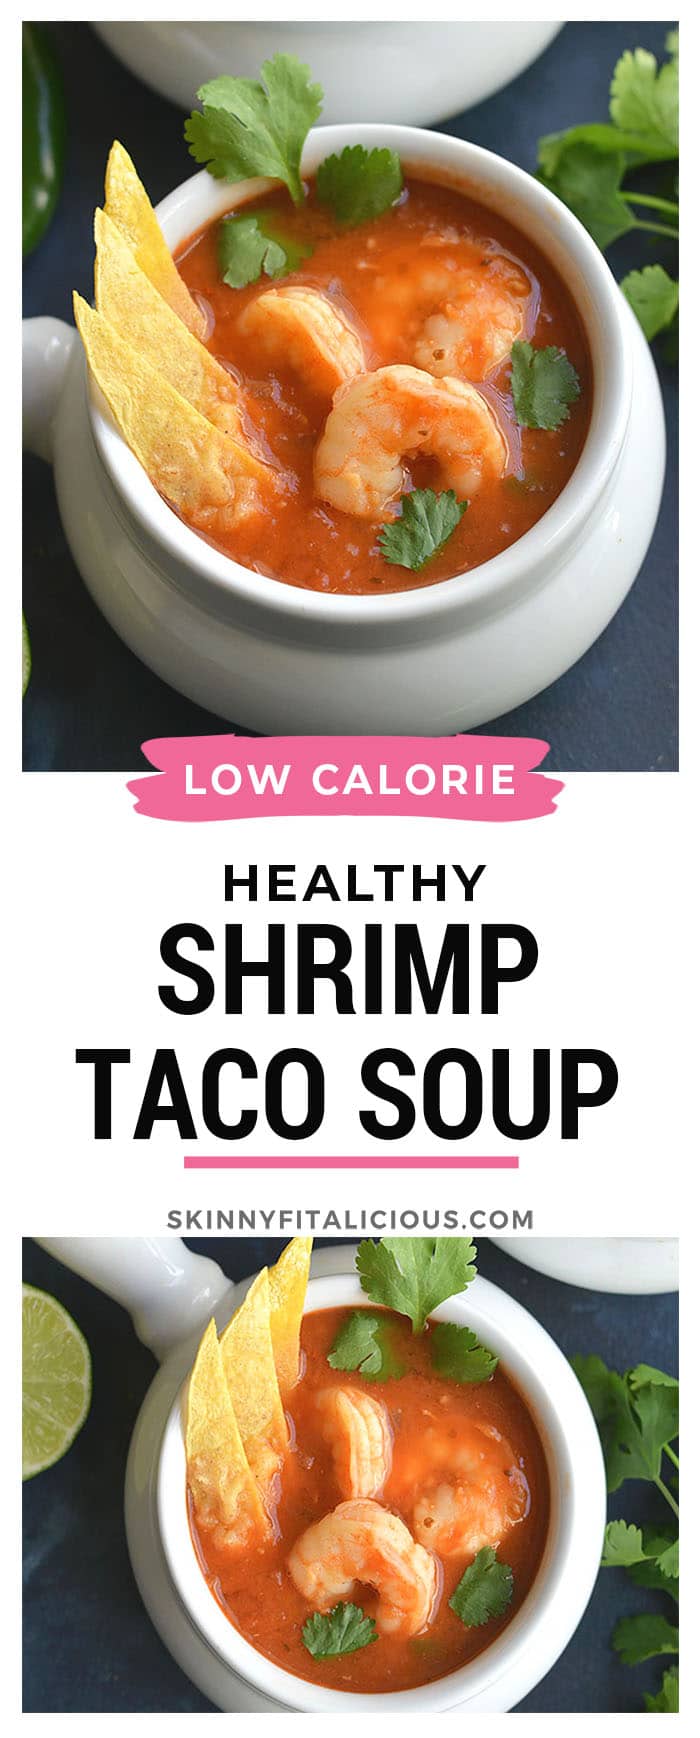 Chipotle Shrimp Taco Soup is an easy to make recipe in 30 minutes. Super spicy with veggies, lean protein, spices and herbs. A soup you can eat year-round that's packed with nourishment and flavor!